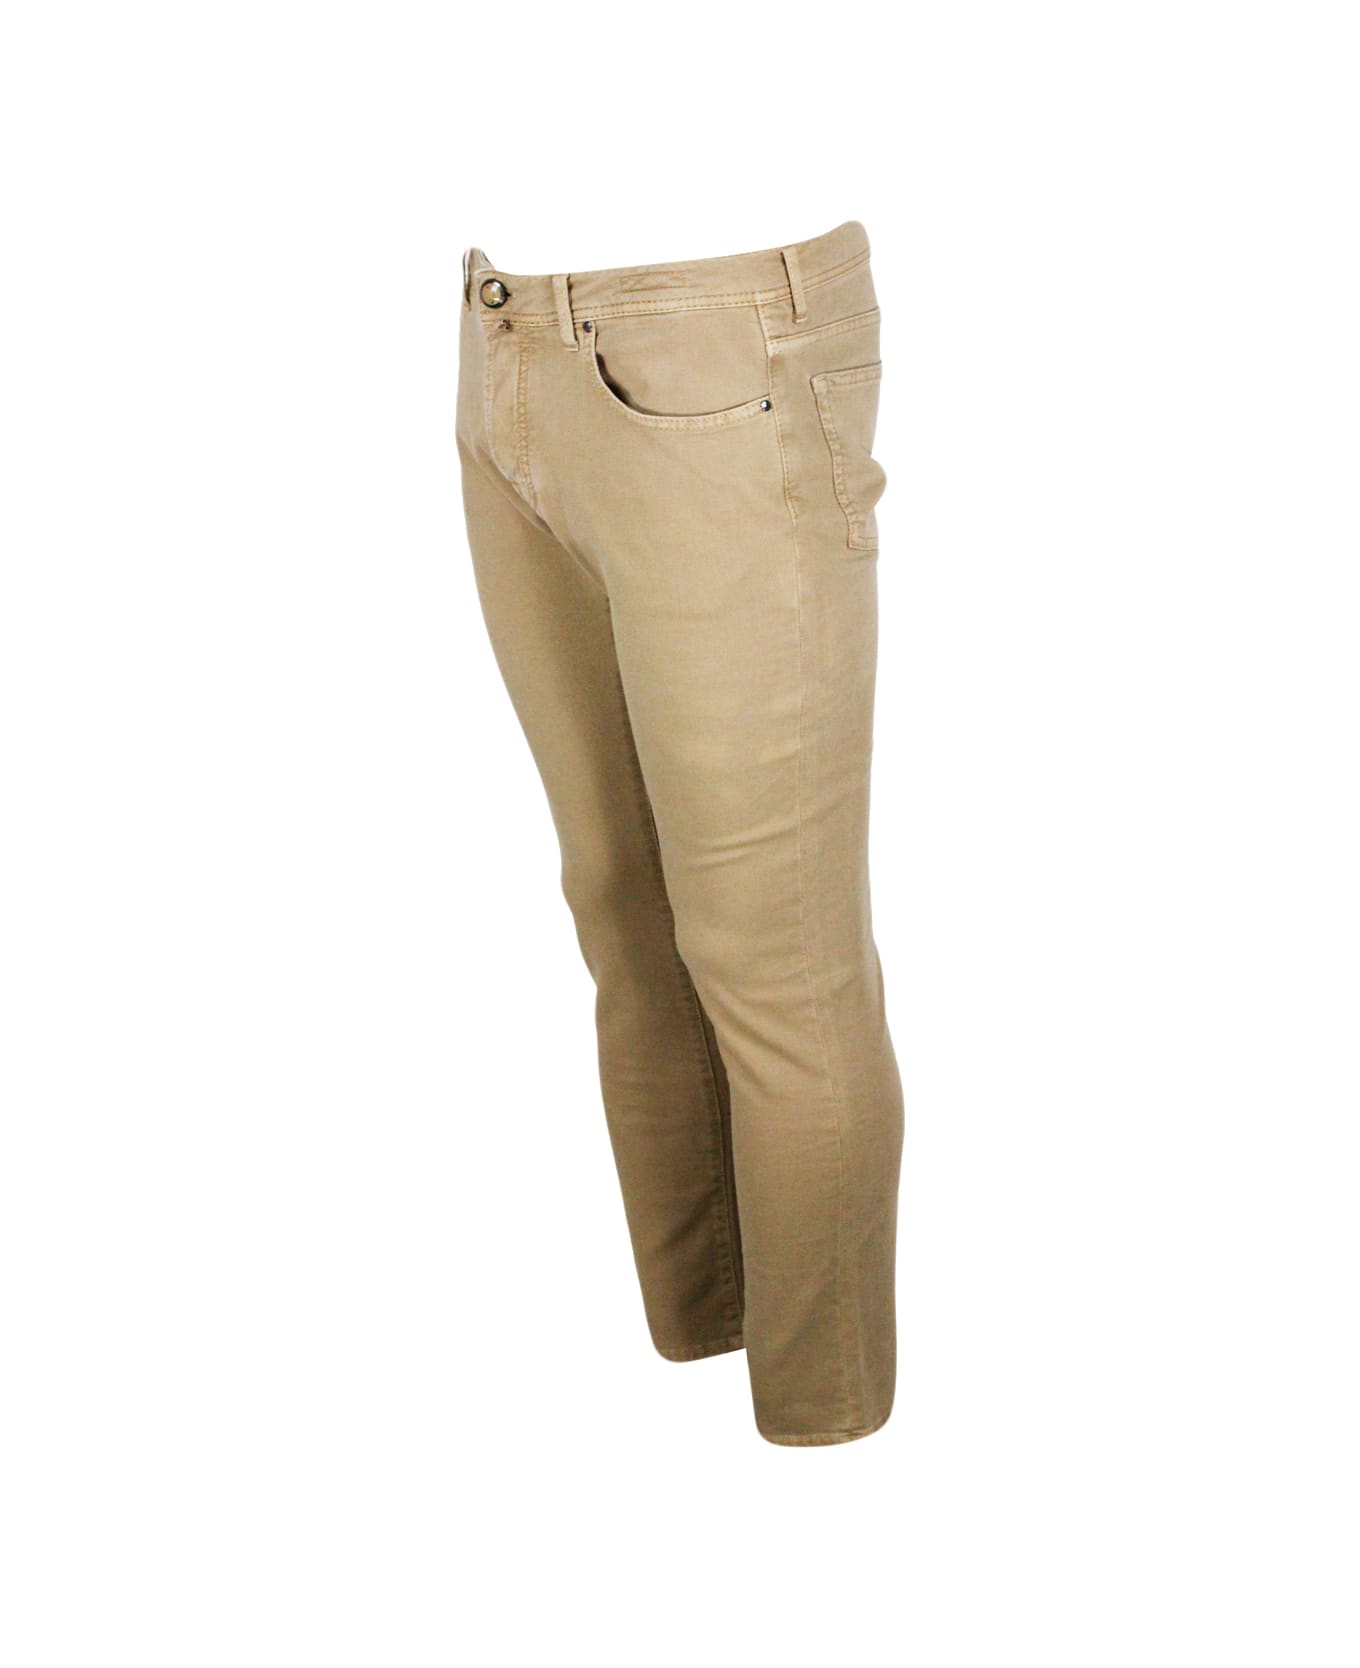 Jacob Cohen Bard J688 Trousers In Luxury Edition In Soft Woven Cotton With 5 Pockets With Closure Buttons And Special Lacquered Button - Tobacco